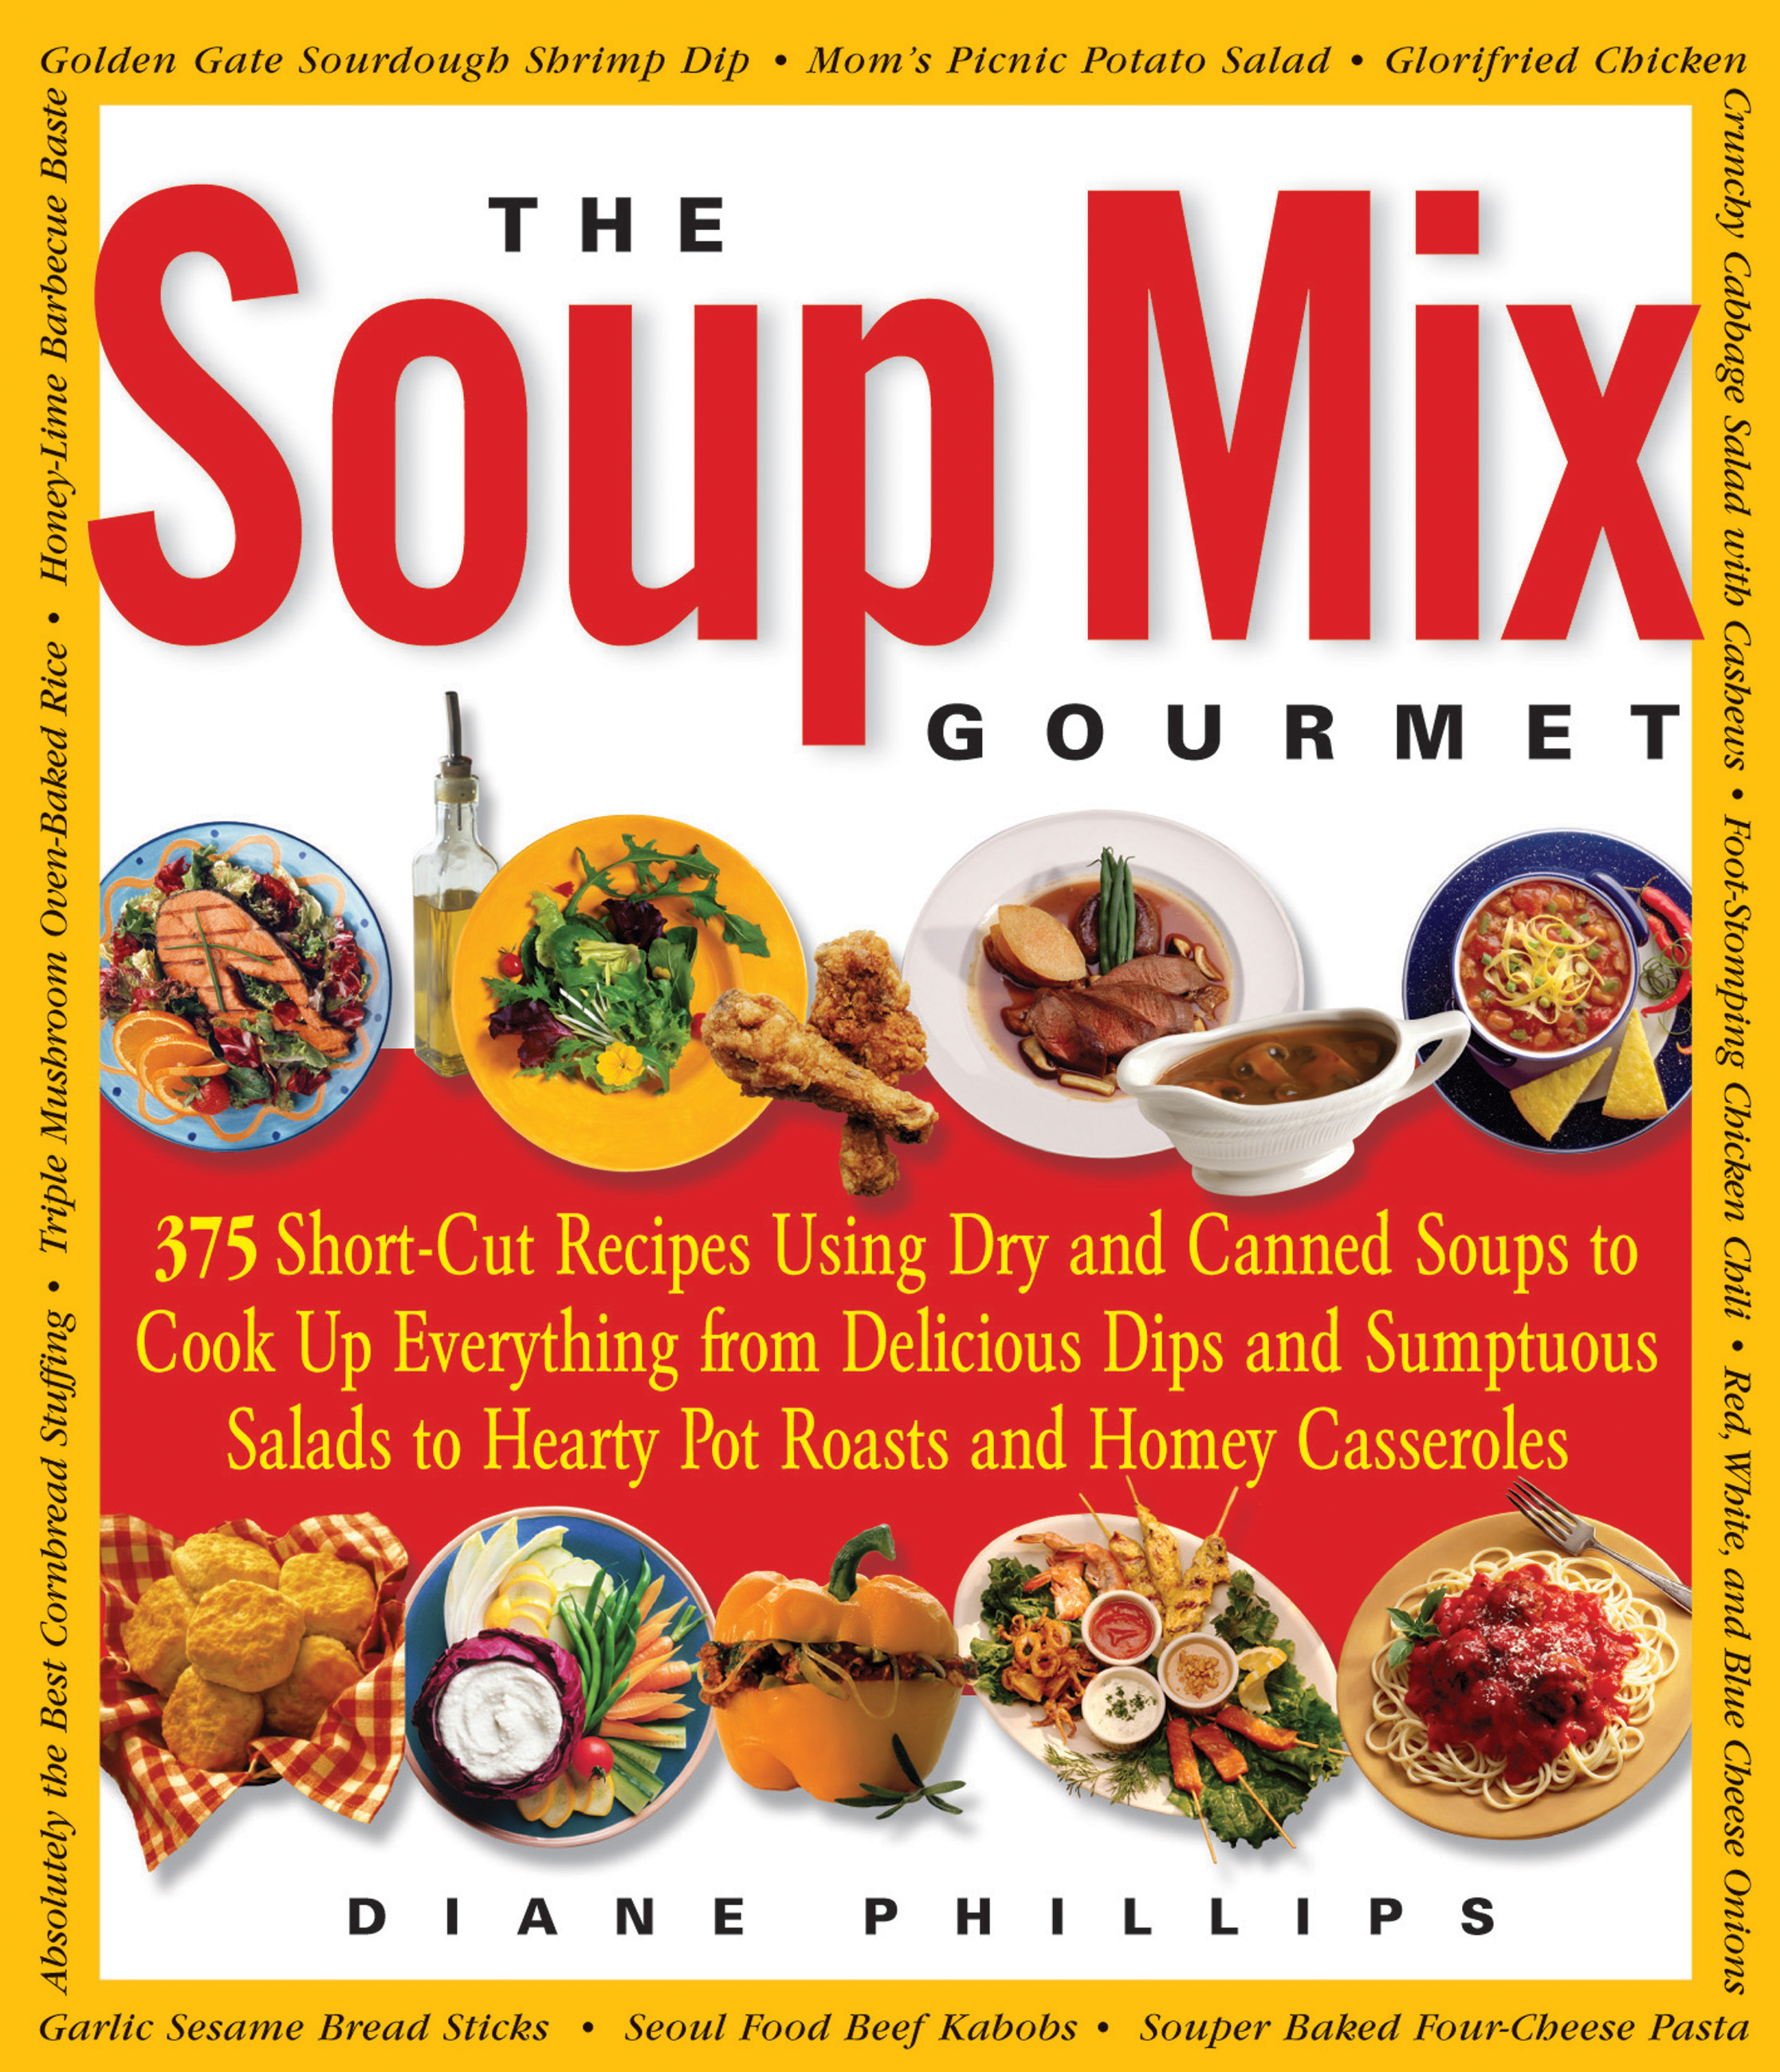 Image de couverture de The Soup Mix Gourmet [electronic resource] : 375 Short-Cut Recipes Using Dry and Canned Soups to Cook Up Everything from Delicious Dips and Sumptuous Salads to Hearty Pot Roasts and Homey Casseroles